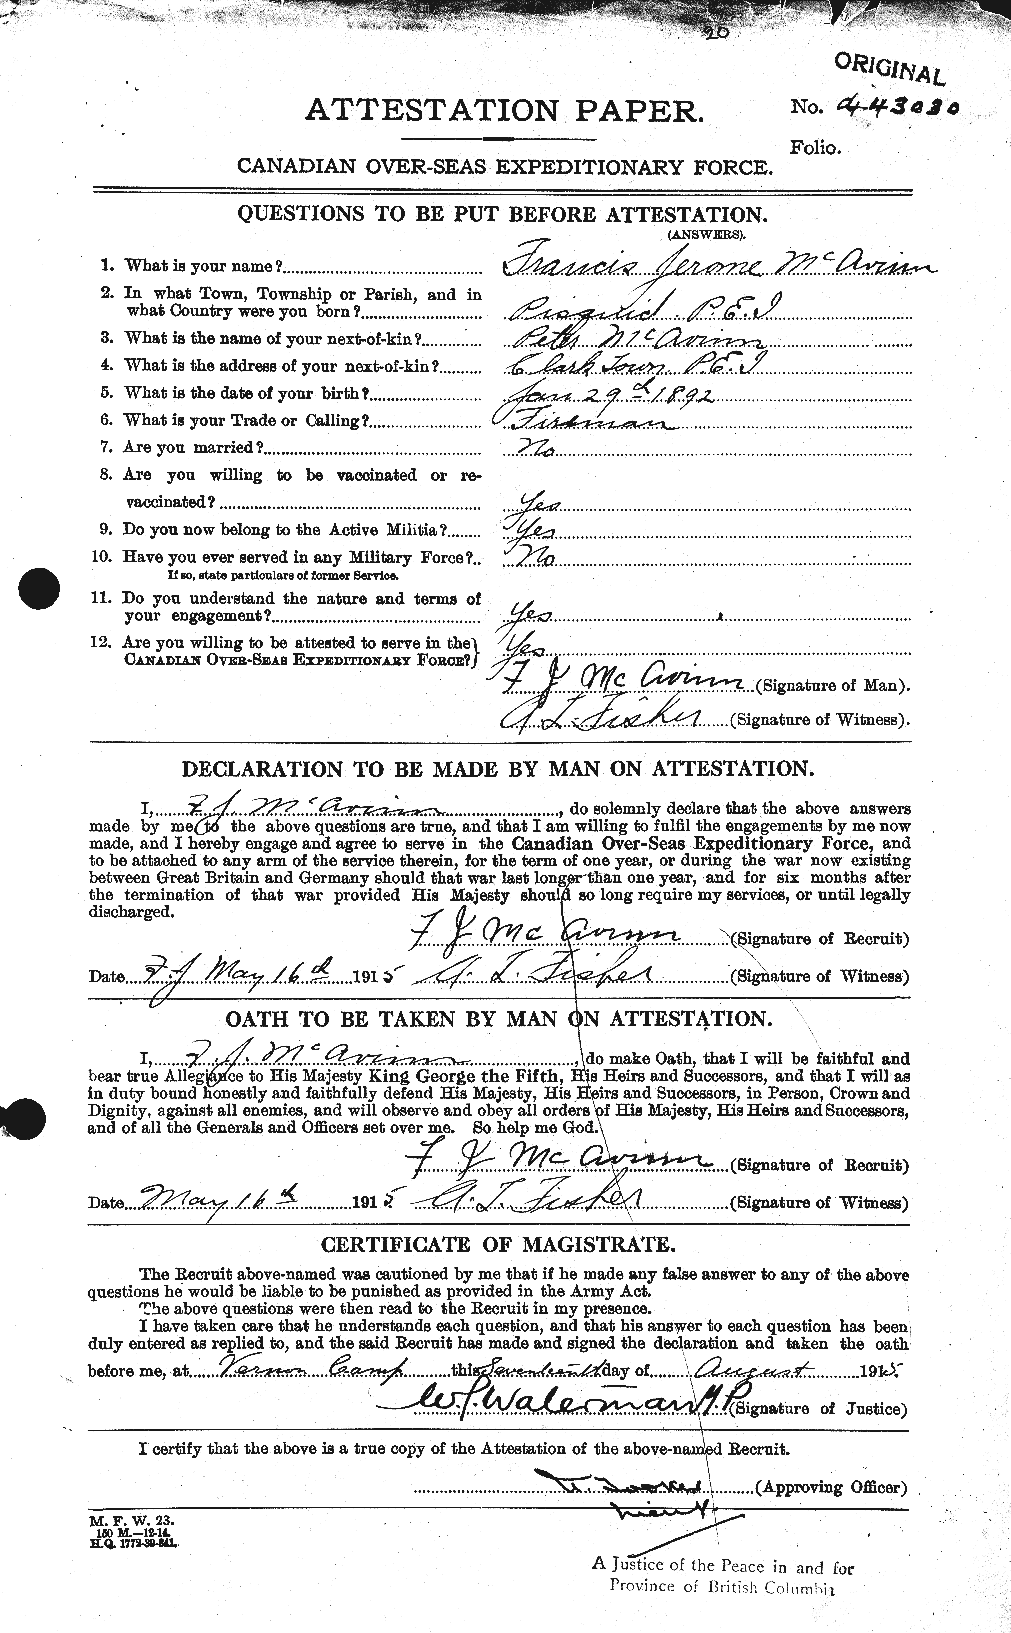 Personnel Records of the First World War - CEF 130050a